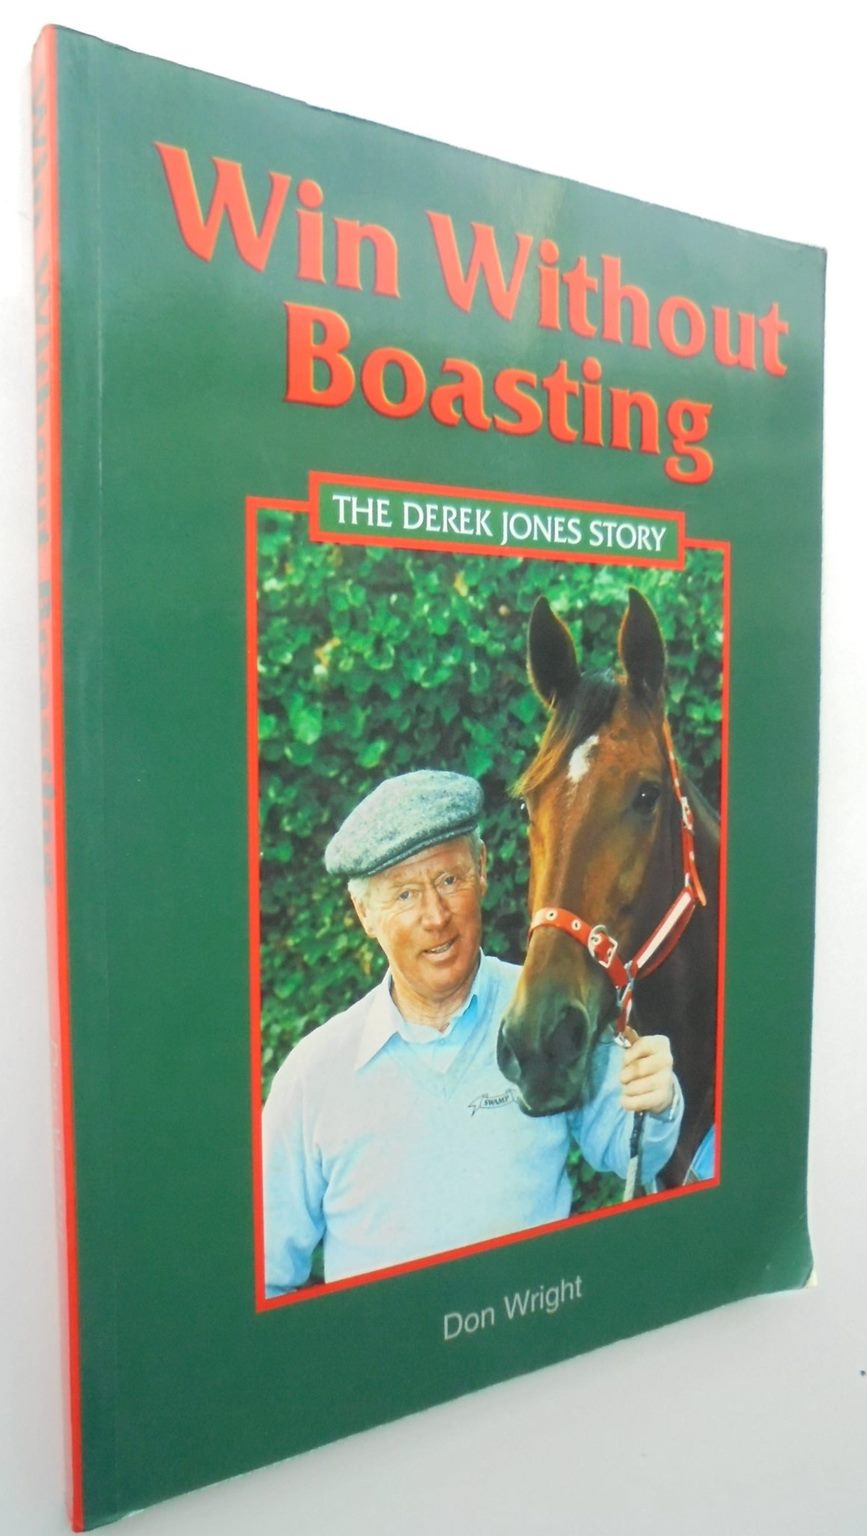 Win without Boasting the Derek Jones Story by Don Wright.